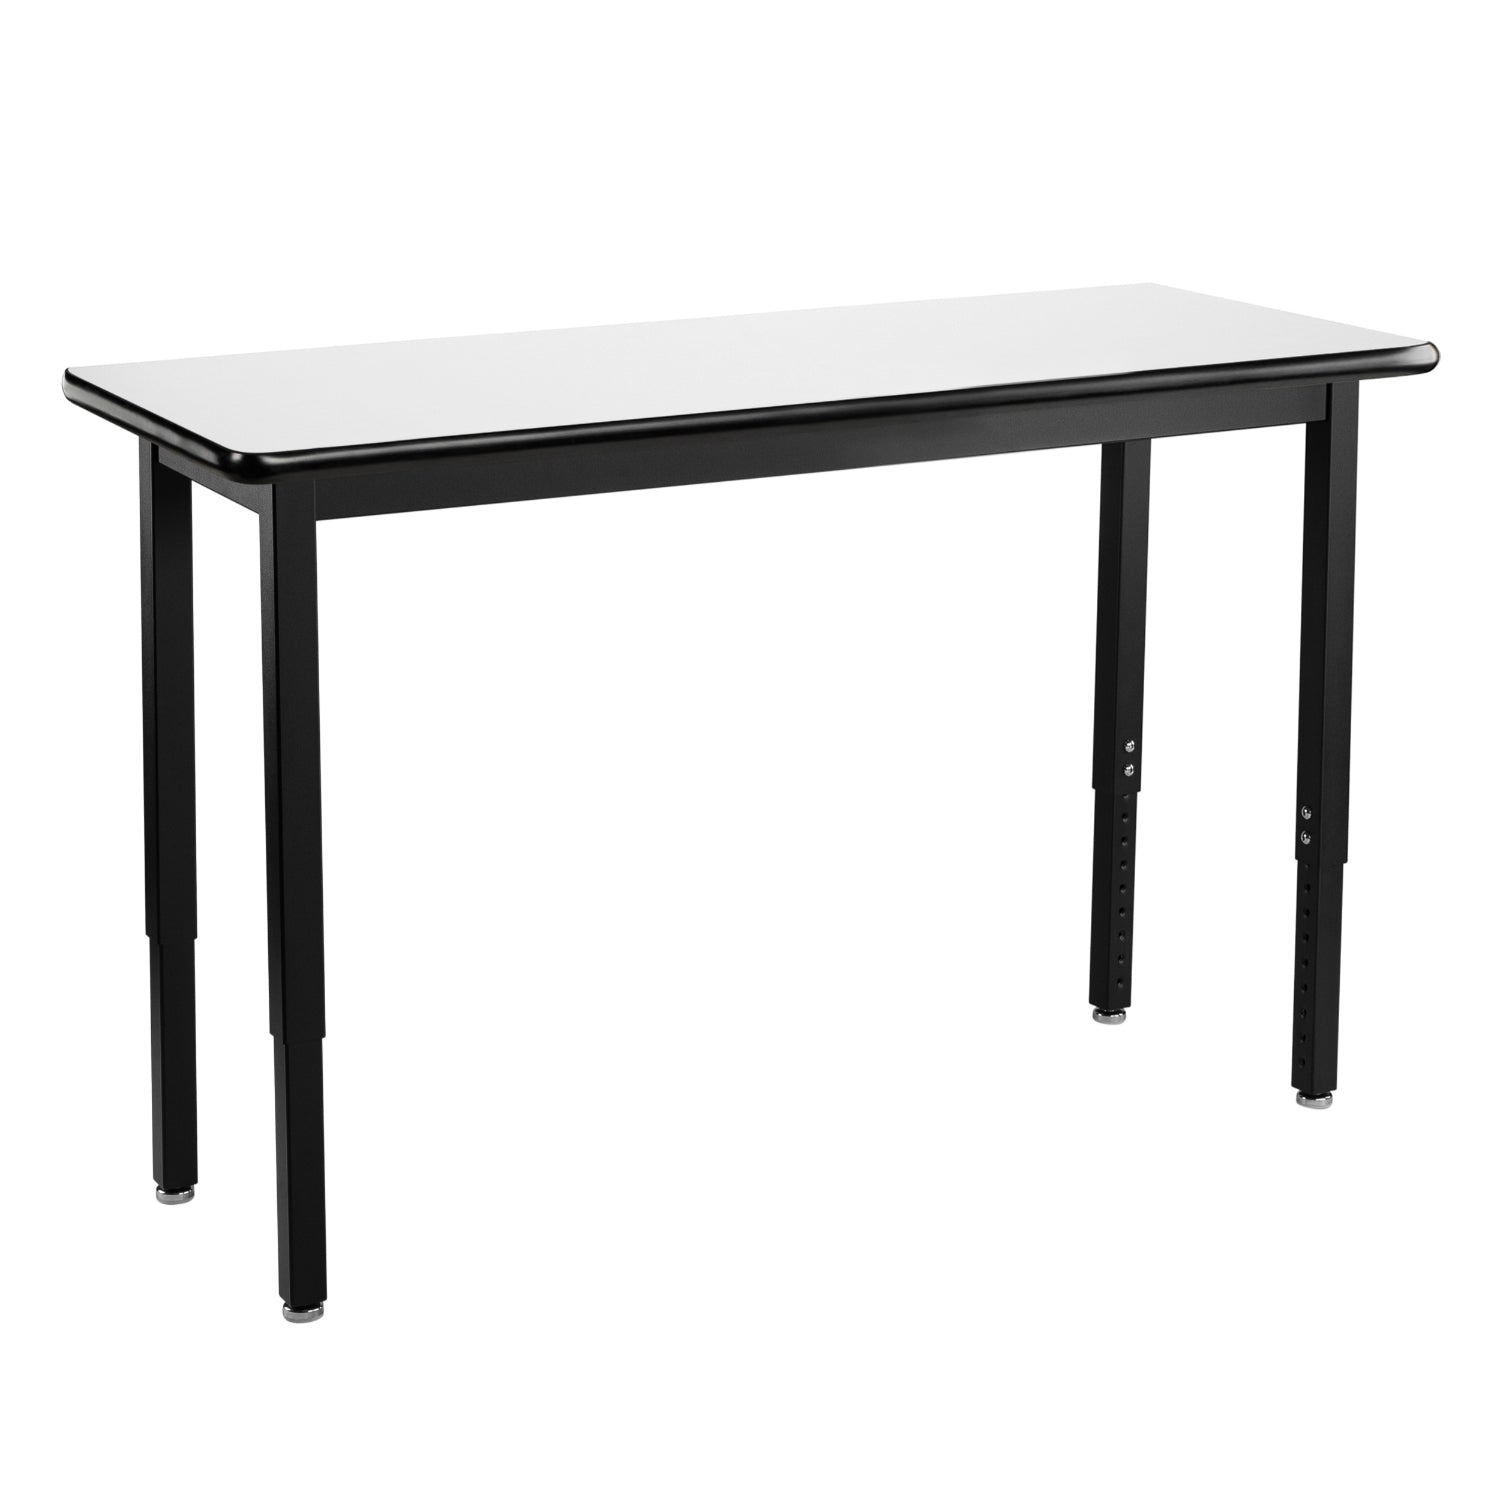 Heavy-Duty Height-Adjustable Utility Table, Black Frame, 18" x 60", Whiteboard High-Pressure Laminate Top